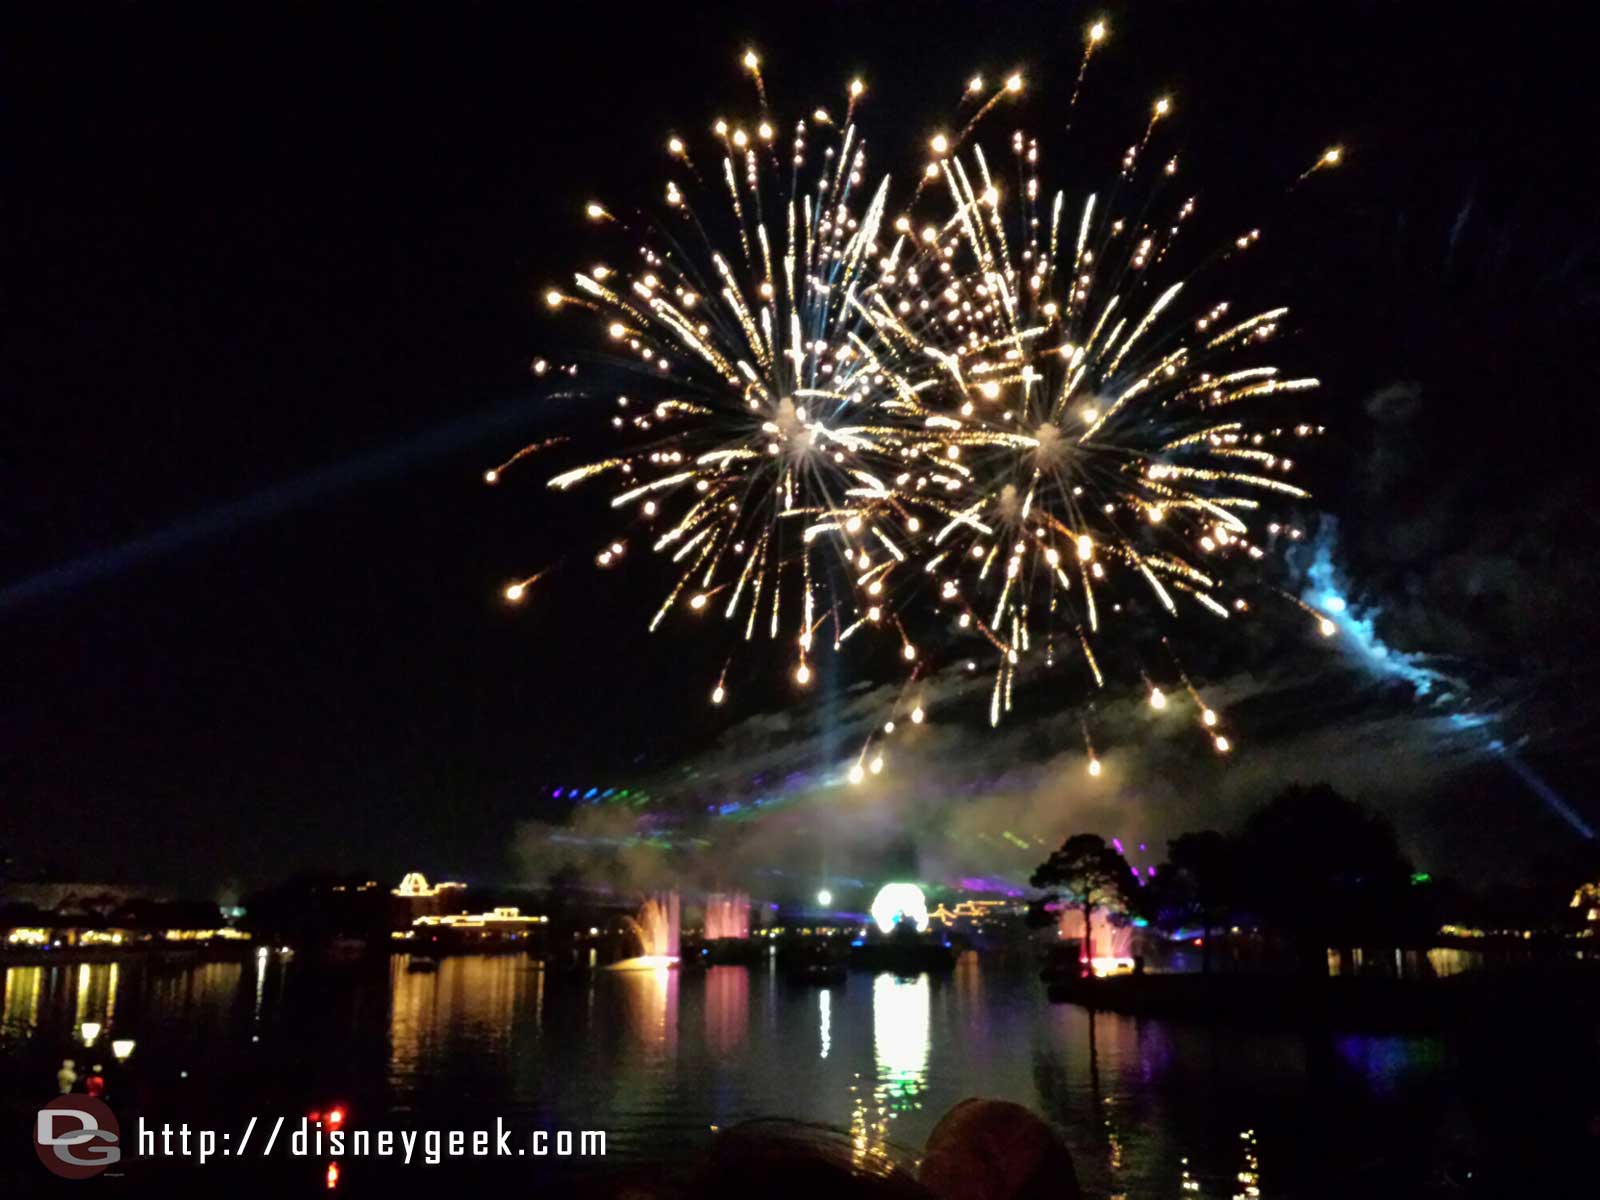 Wrapped up the day with Illuminations: Reflections of Earth